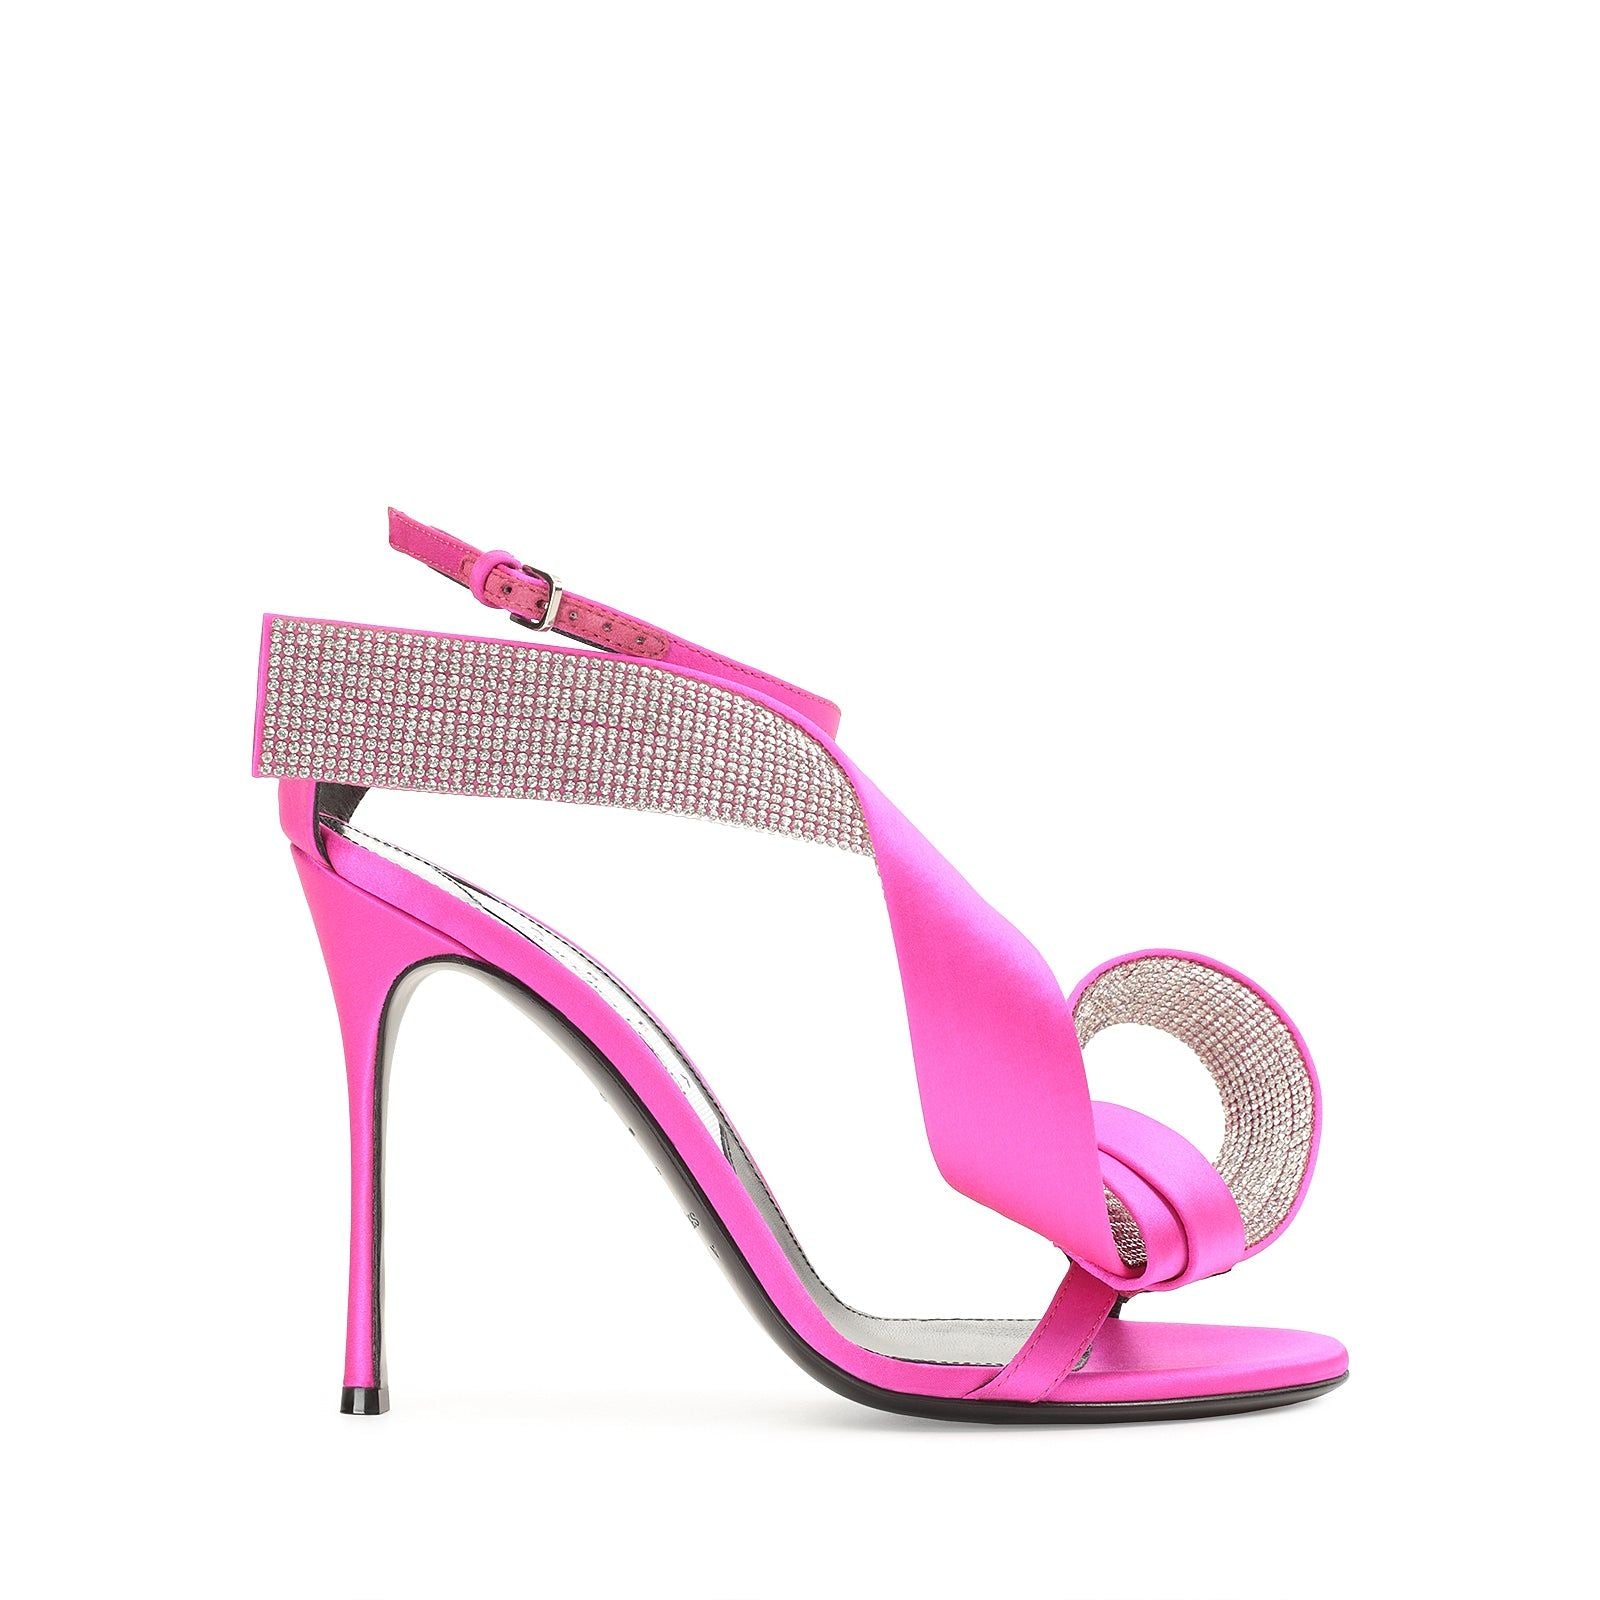 Area Marquise 105 heeled sandals - Dragon Fruit